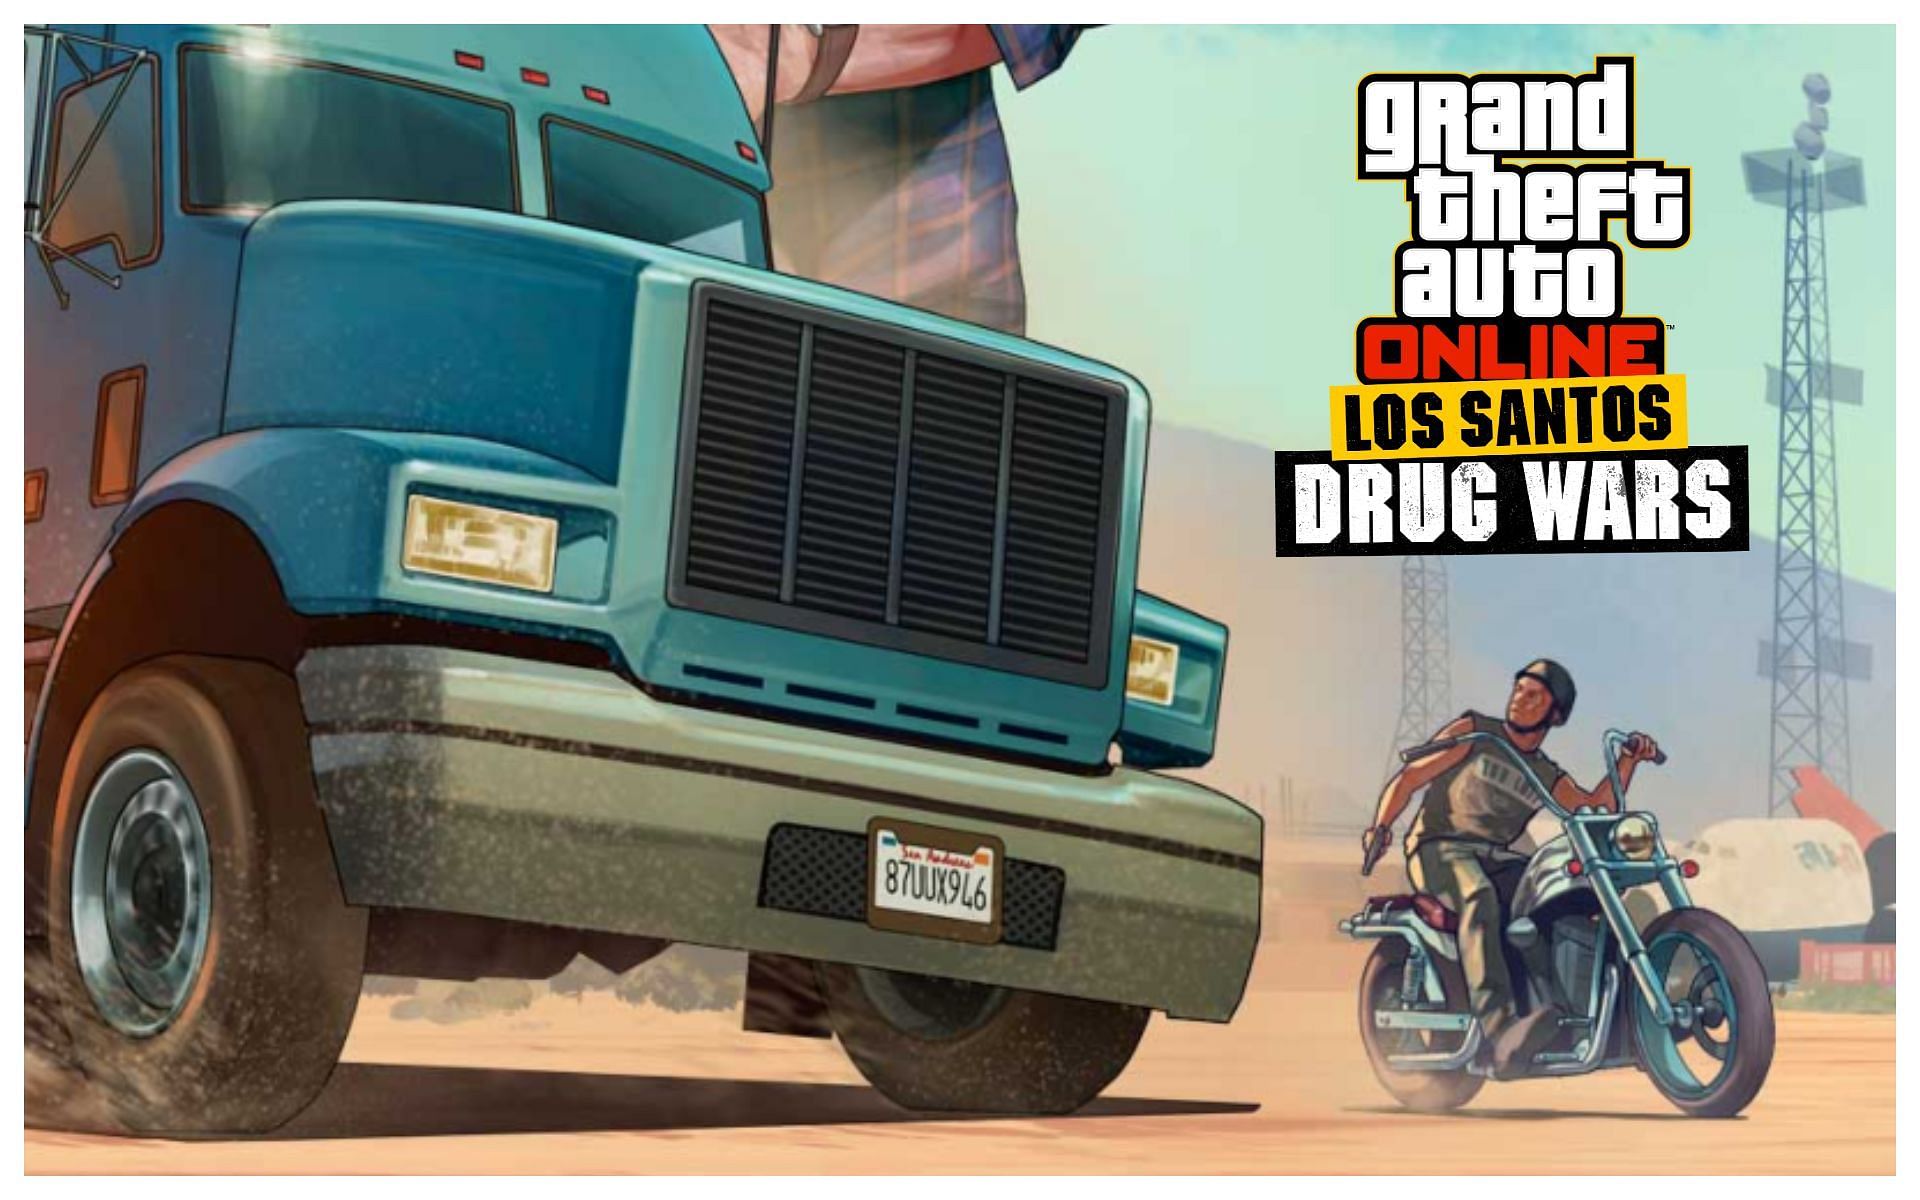 This is how Acid Lab sell missions will work this week (Images via Rockstar Games)